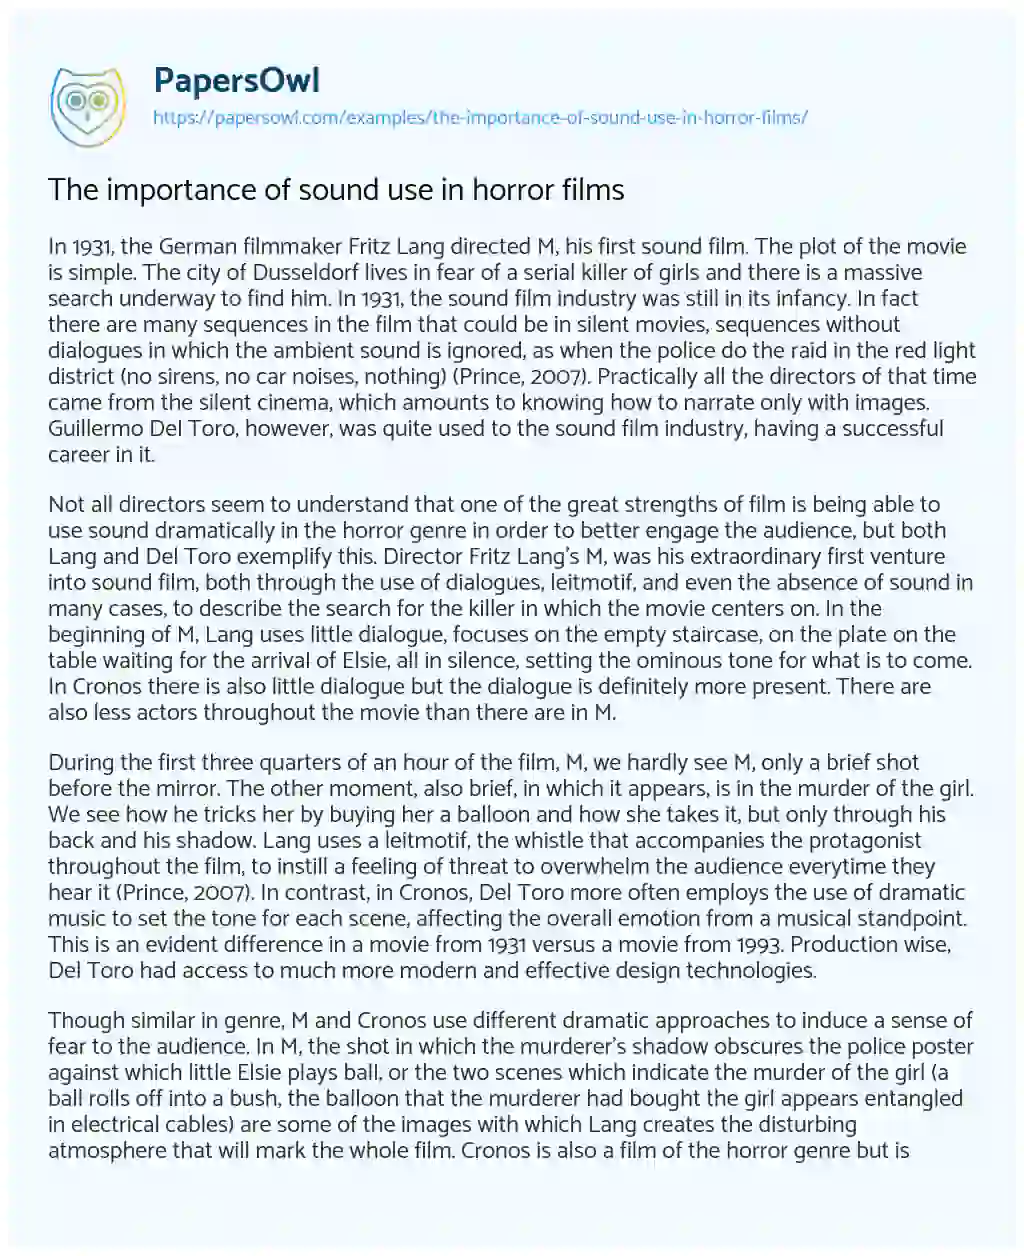 Essay on The Importance of Sound Use in Horror Films